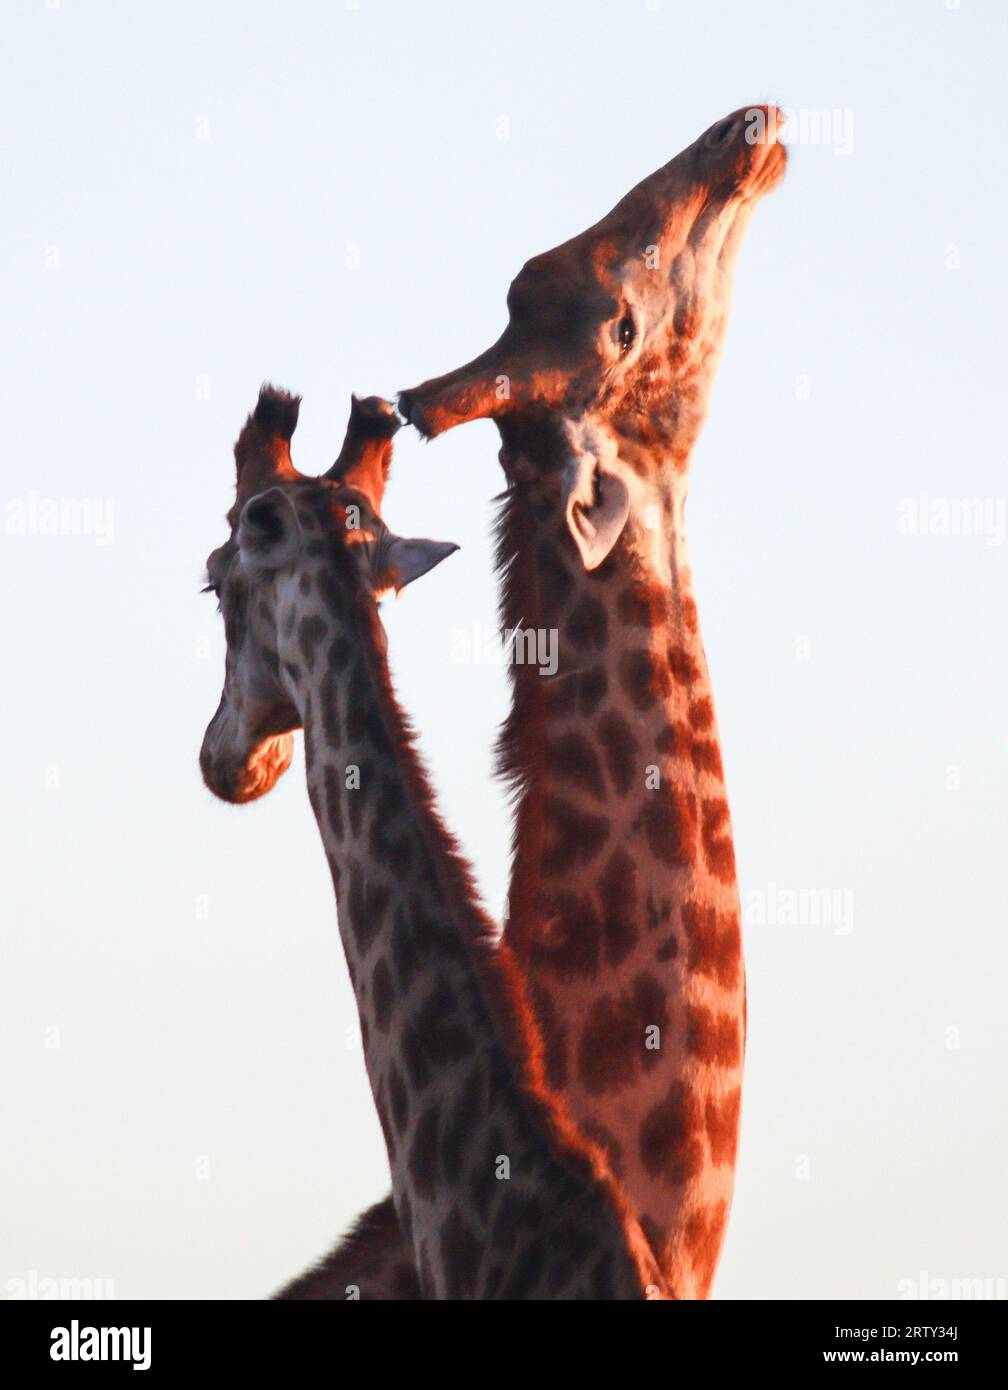 close up of two giraffes neck and heads interlocked Stock Photo